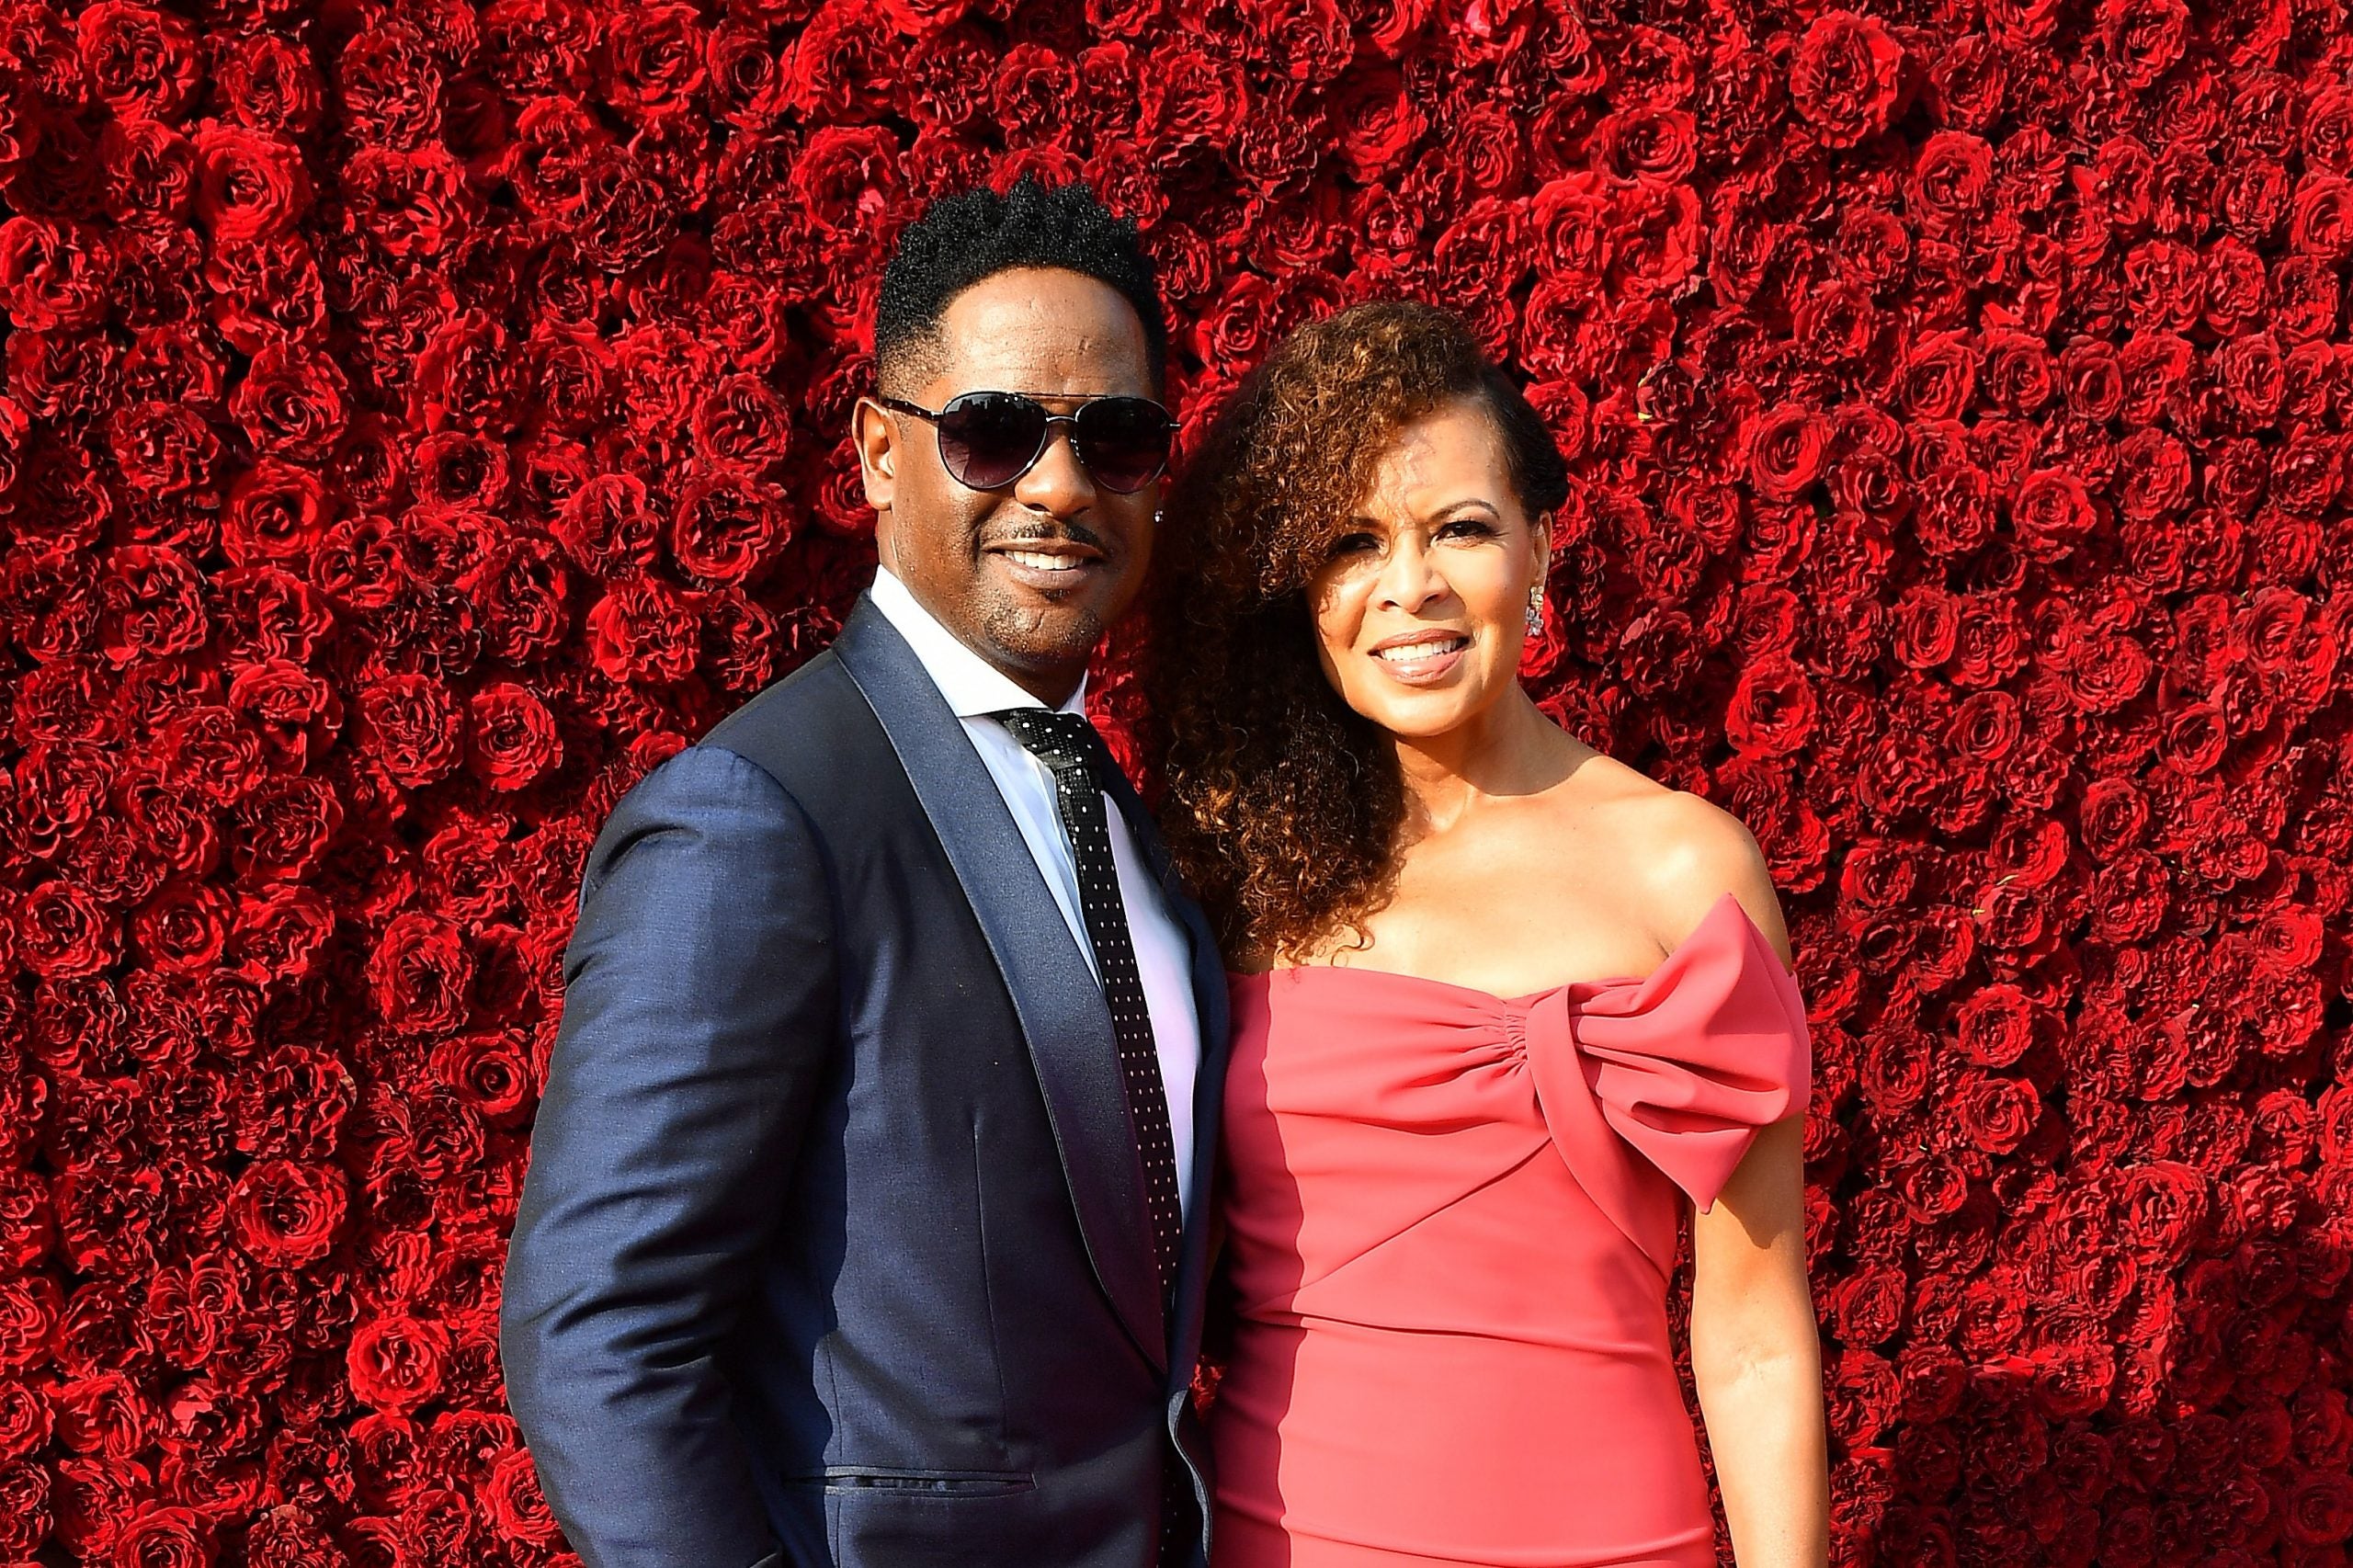 Blair Underwood and Wife Desiree DaCosta Are Divorcing After 27 Years Of Marriage